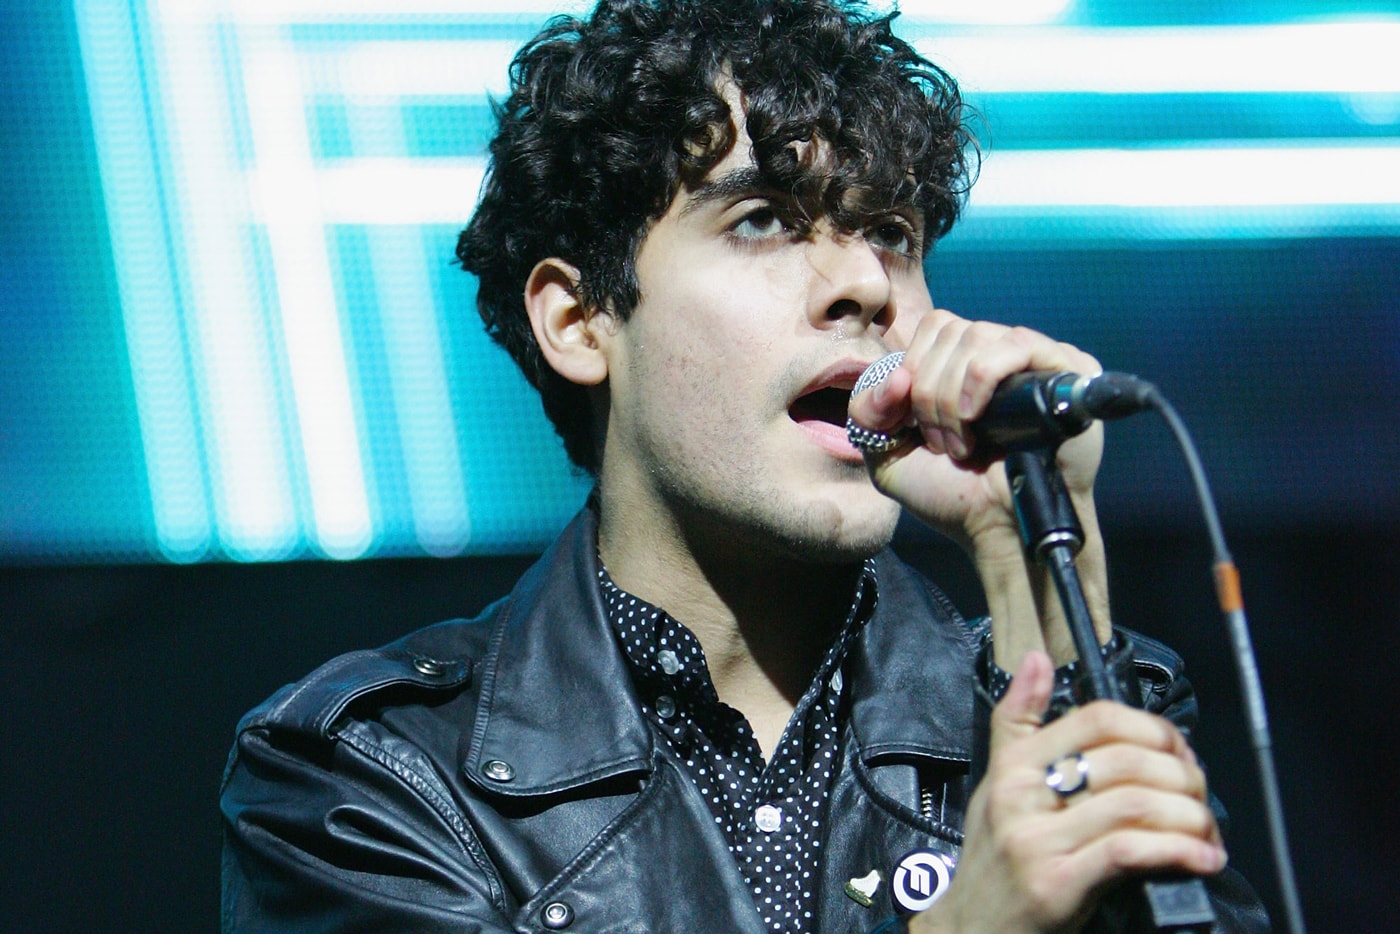 Neon Indian – Children of the Revolution (T. Rex cover)